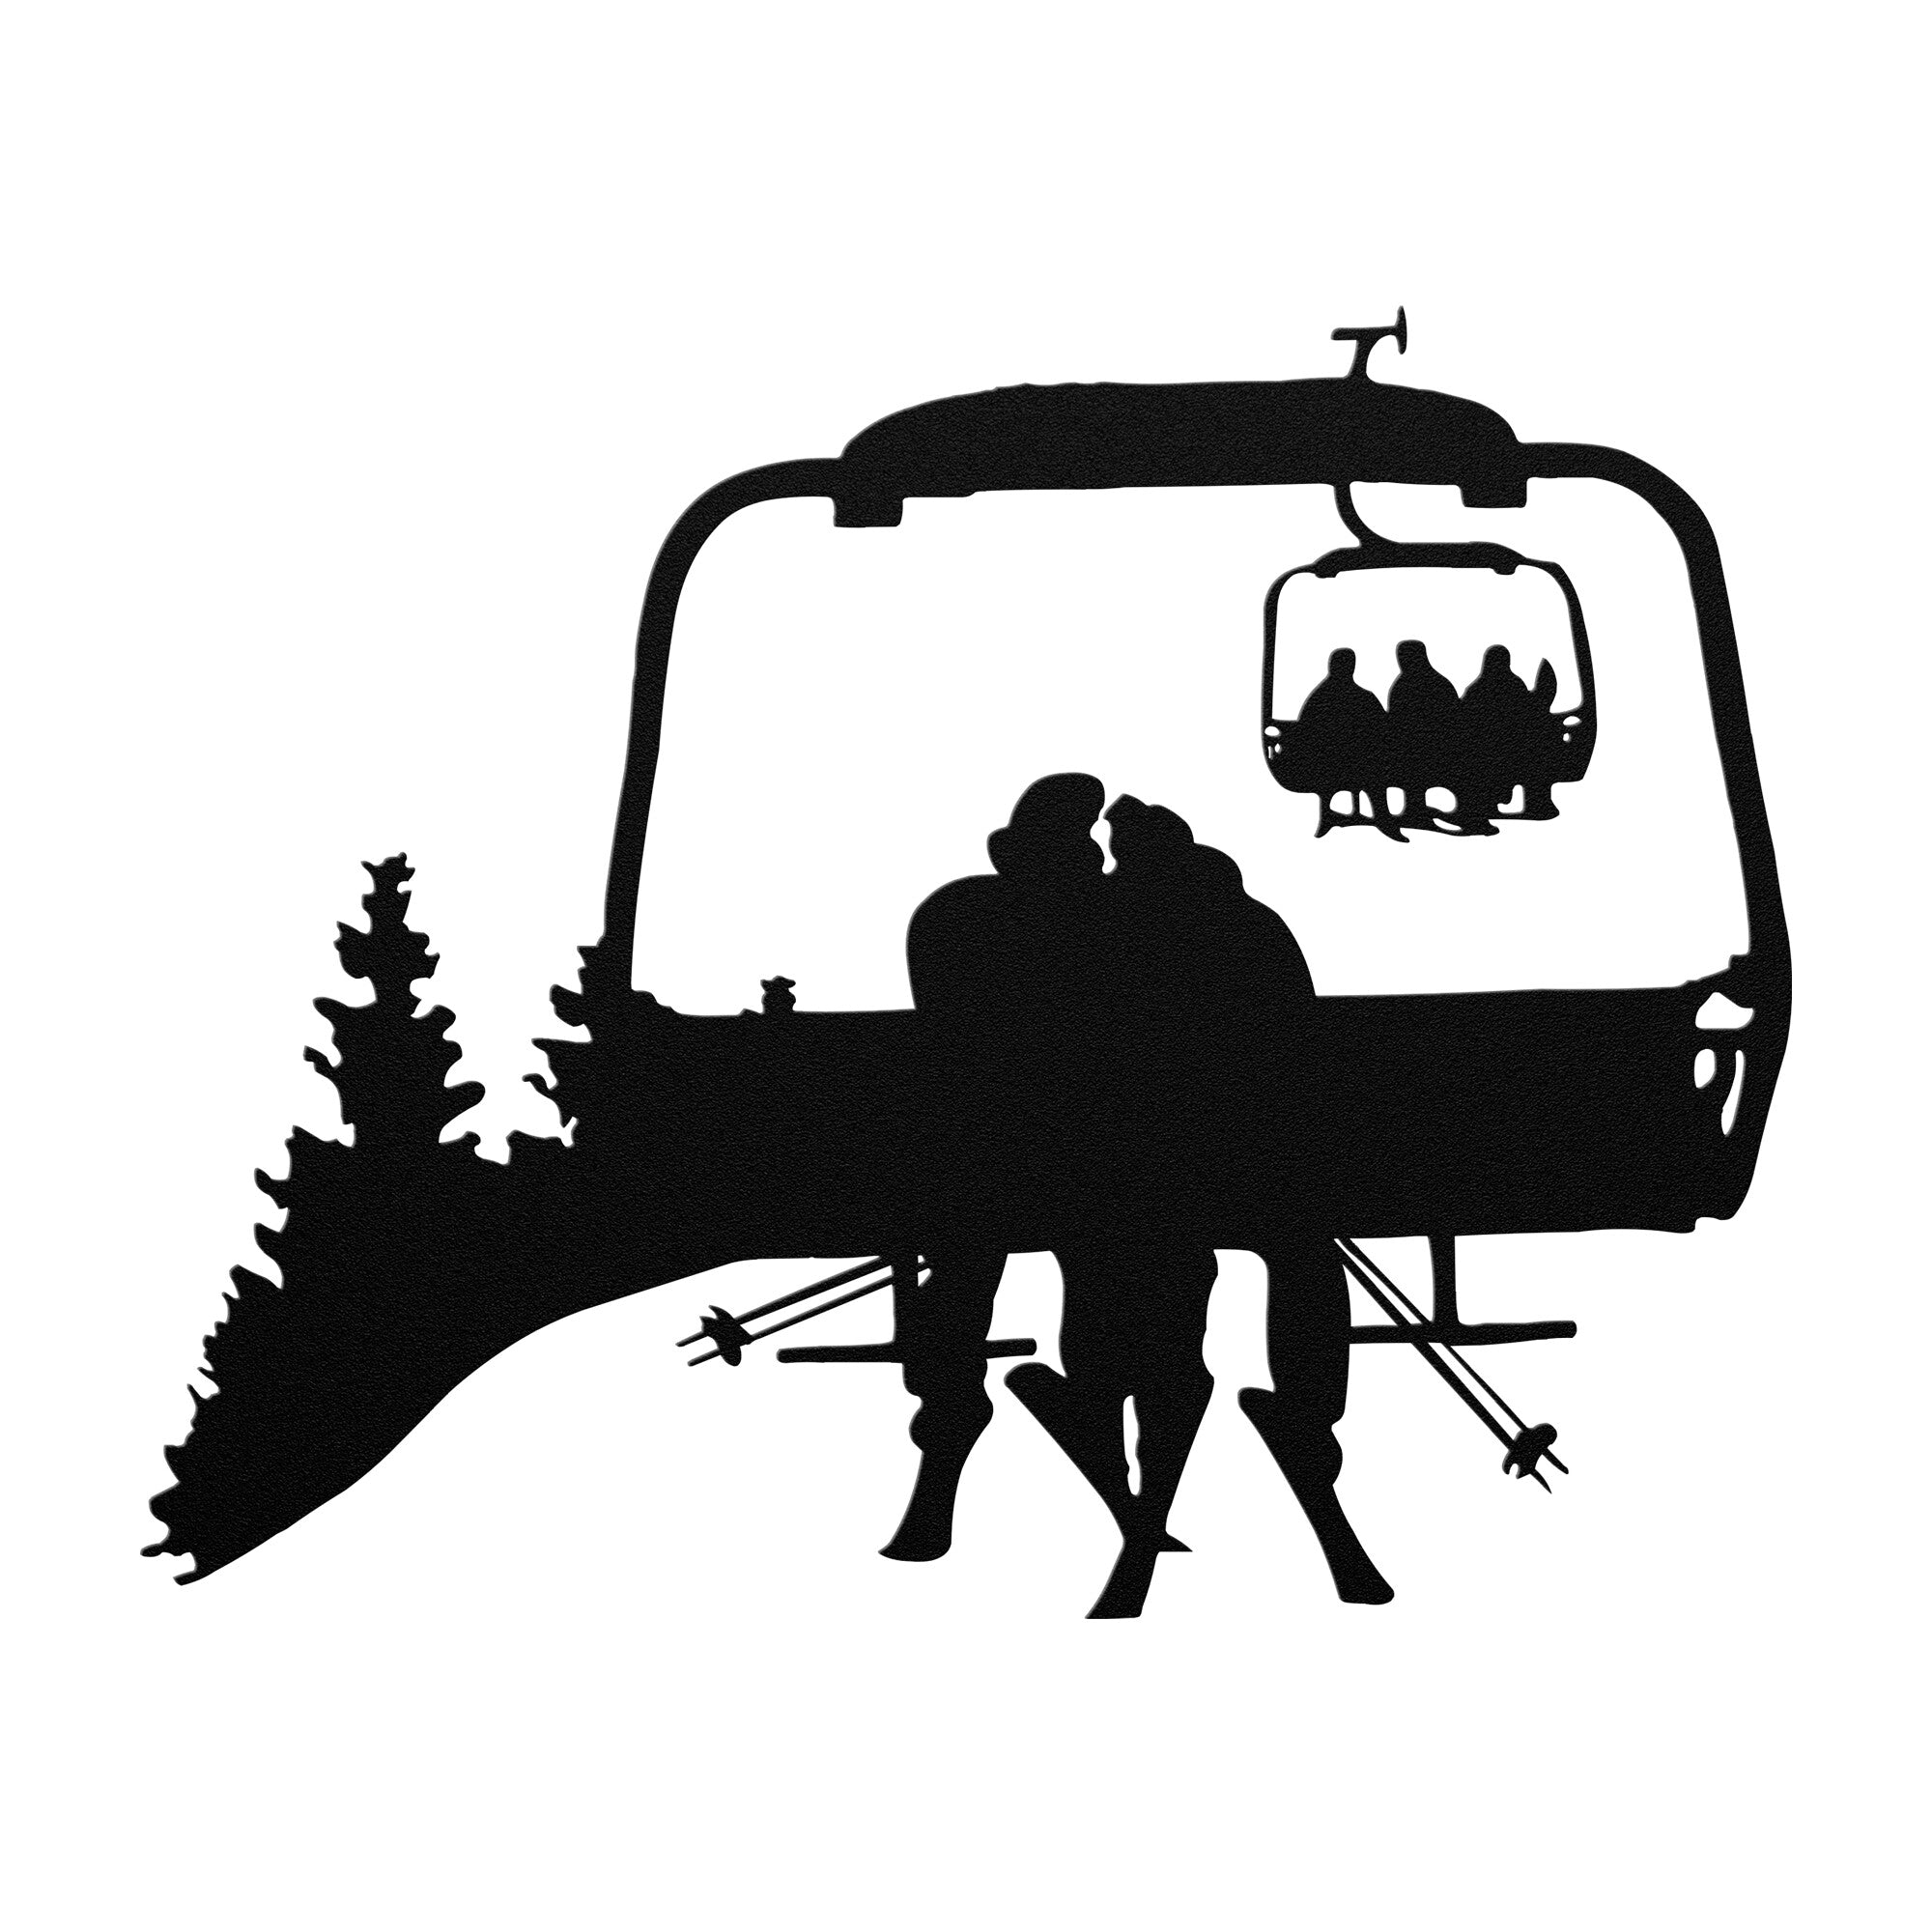 PERSONALIZED CHAIRLIFT SKIING COUPLE METAL WALL ART (🇺🇸 MADE IN THE USA)